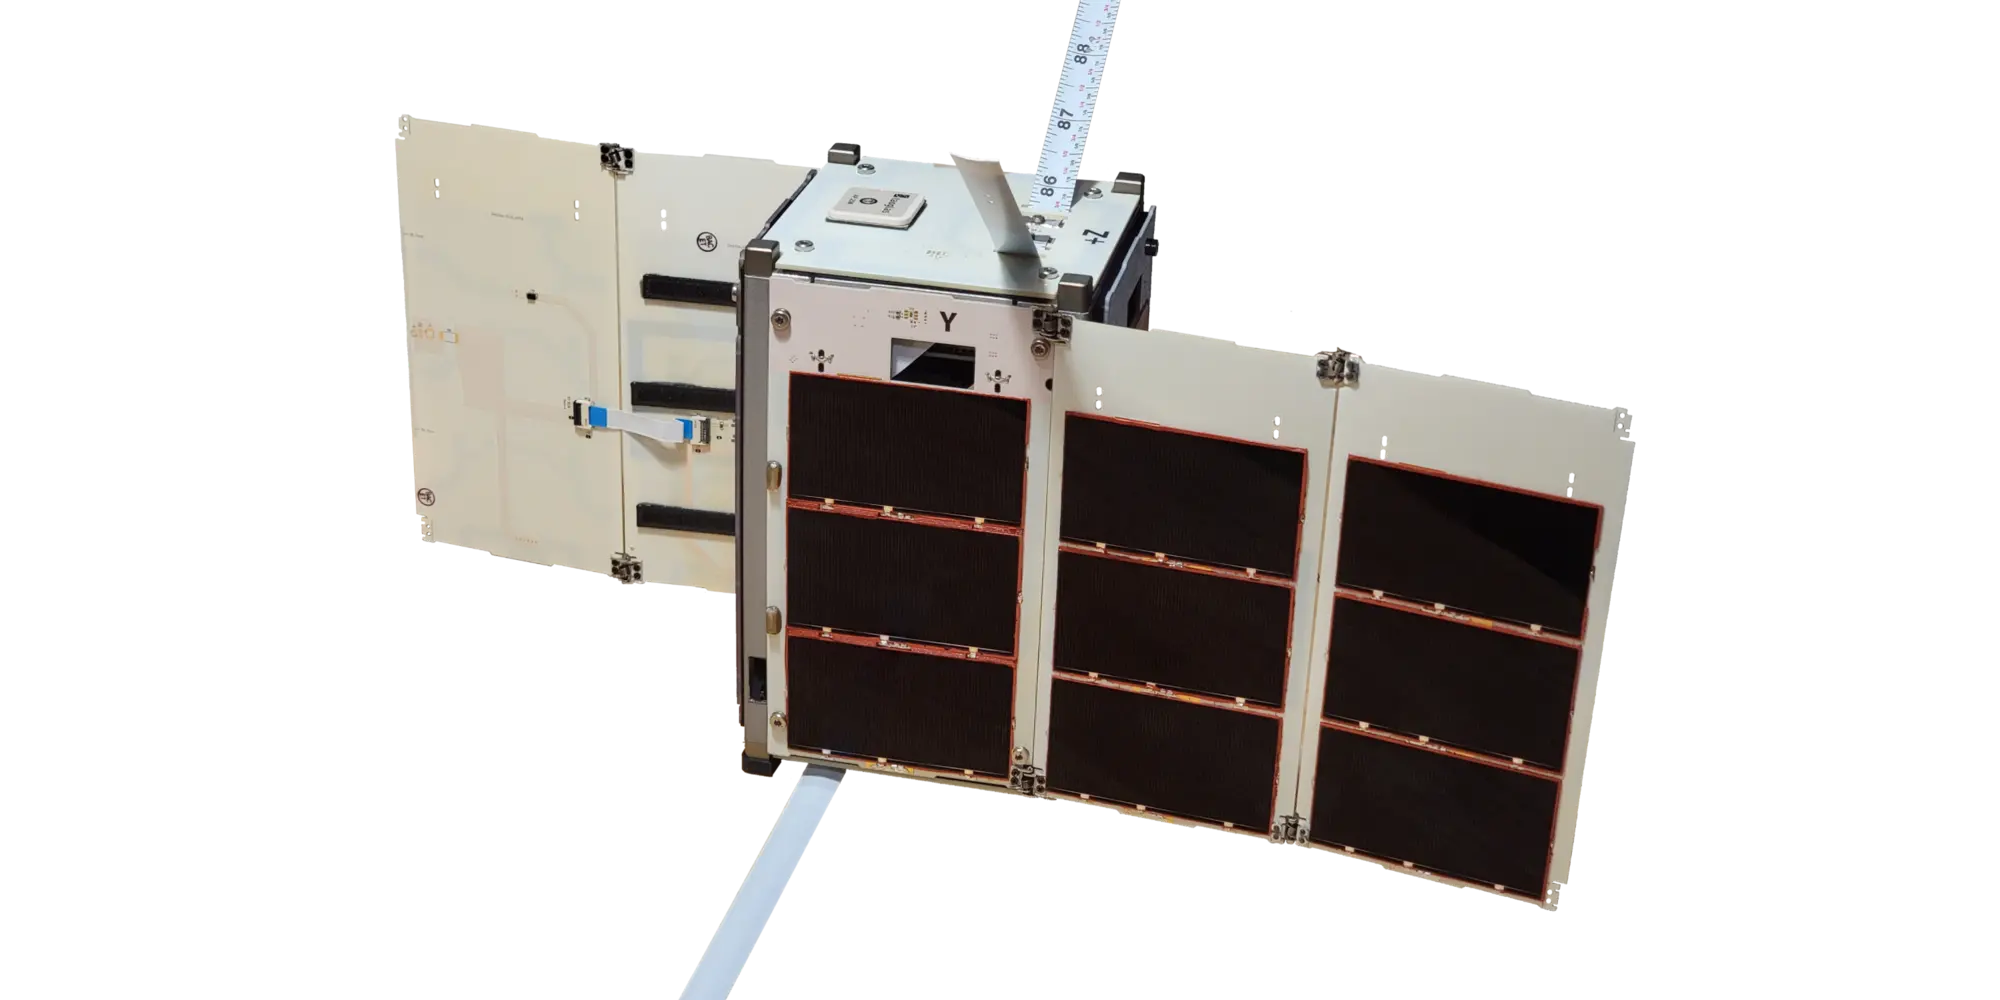 One of the four PyCubed-Based CubeSat (PY4) spacecraft.